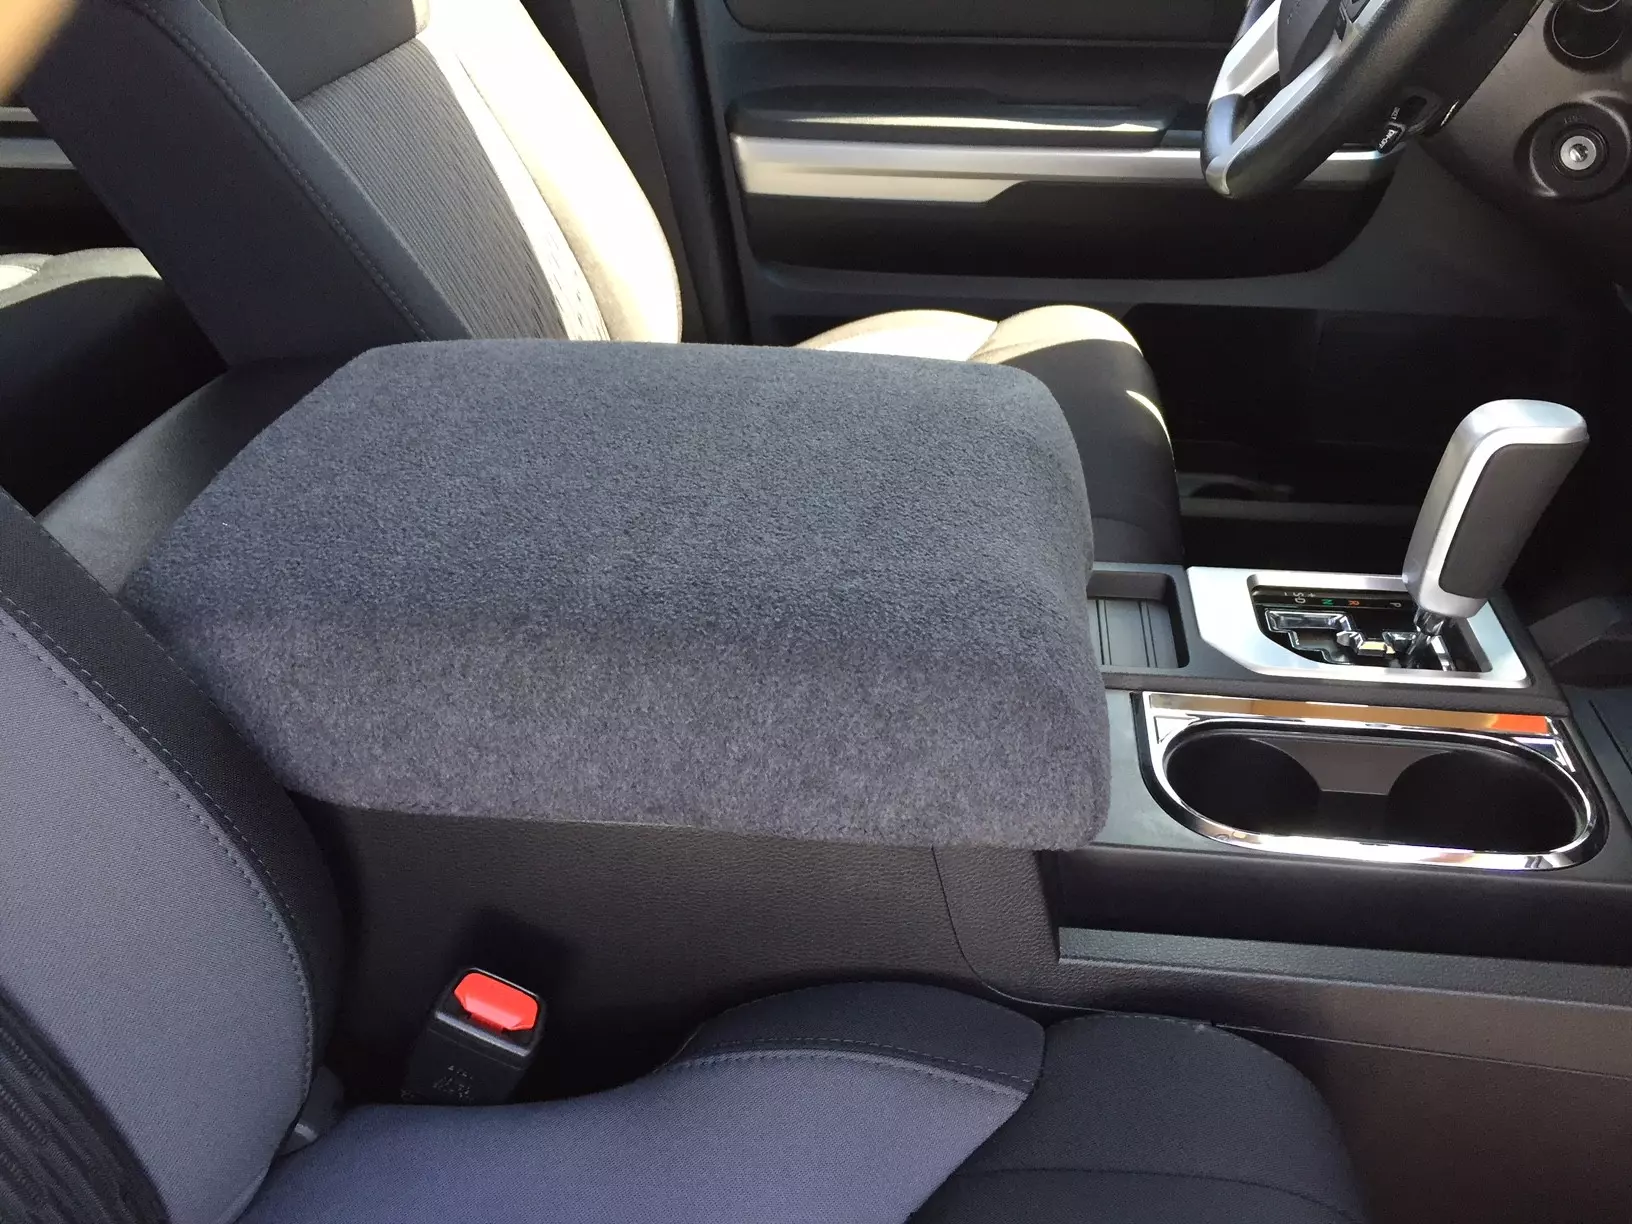 Buy Fleece Center Console Armrest Cover fits the Toyota Tundra 2010-2021 (All Models with Front Bucket Seats)